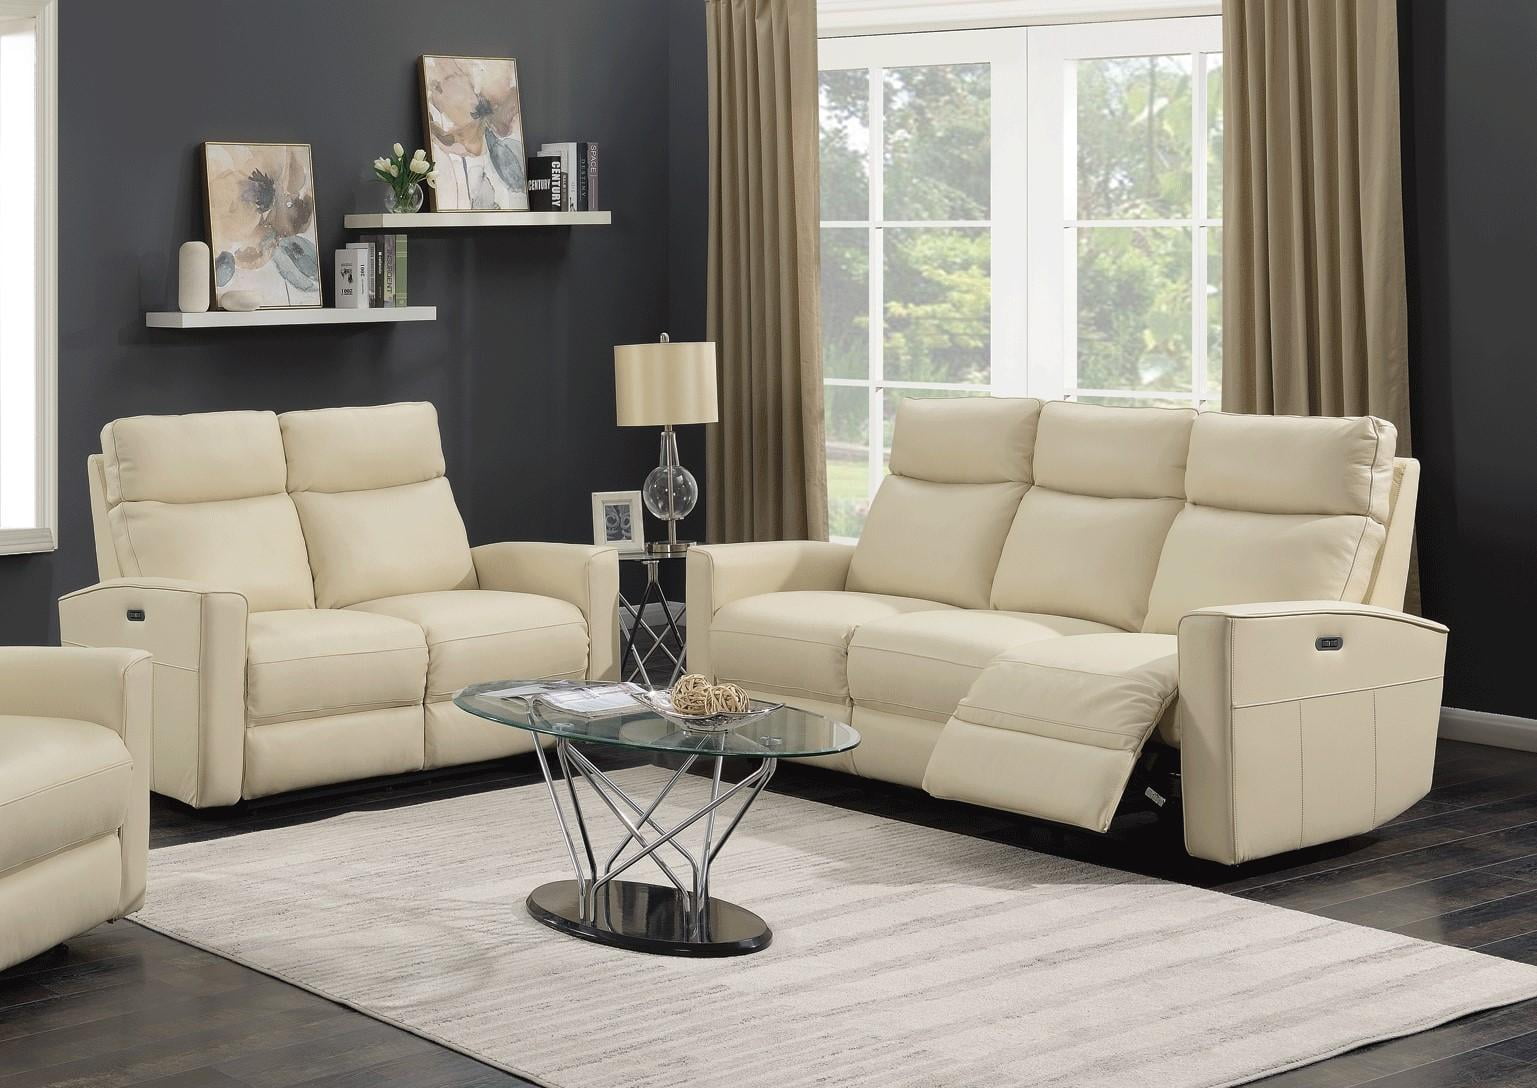 Ivory Leather Living Recliner Sofa, Ivory Leather Loveseat